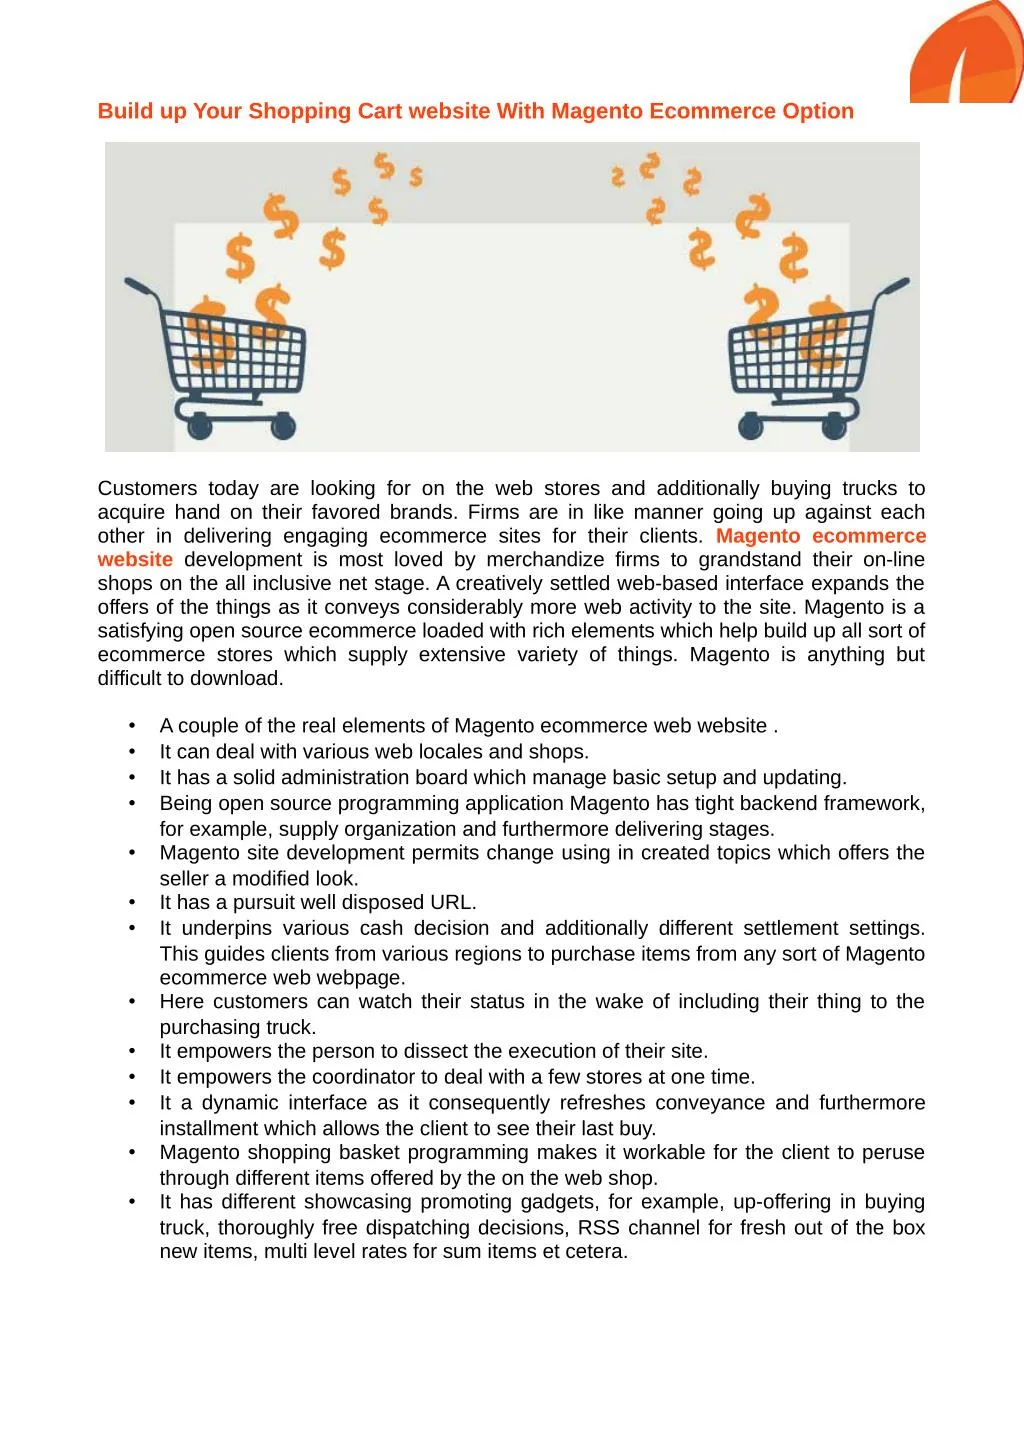 build up your shopping cart website with magento